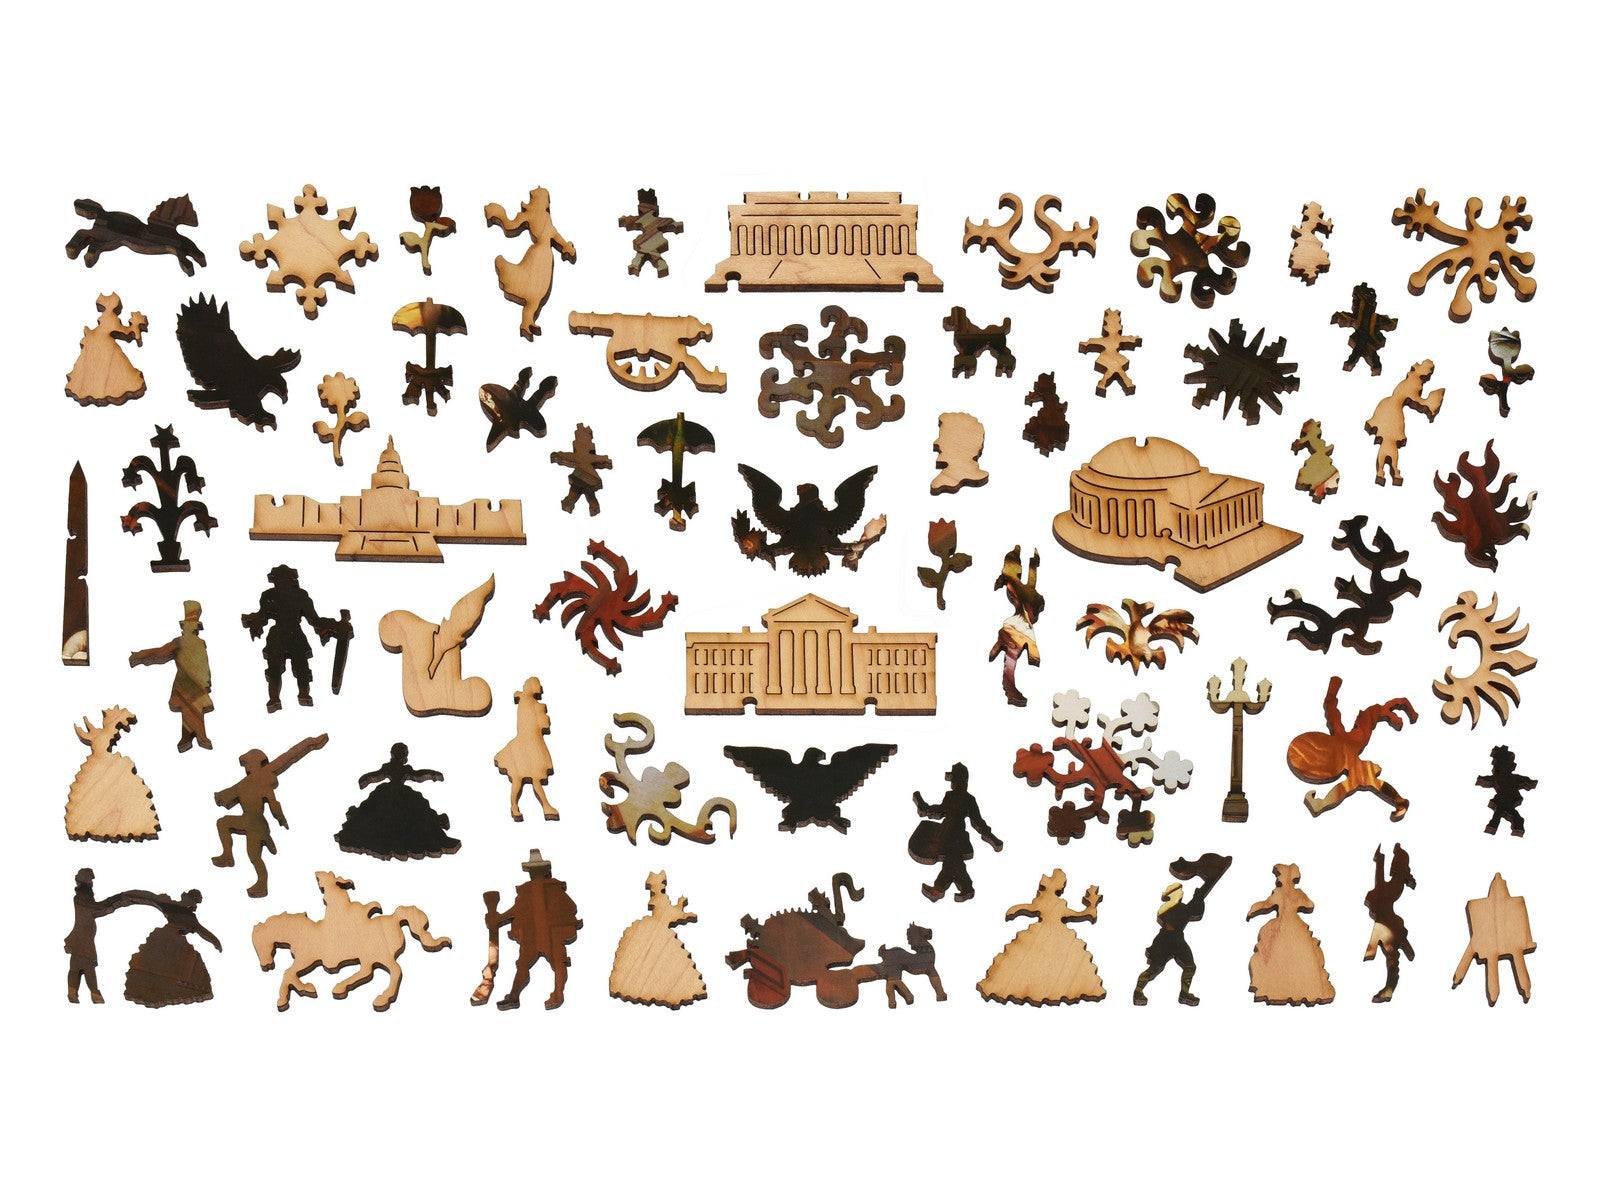 The whimsy pieces that can be found in the puzzle, Declaration of Independence.